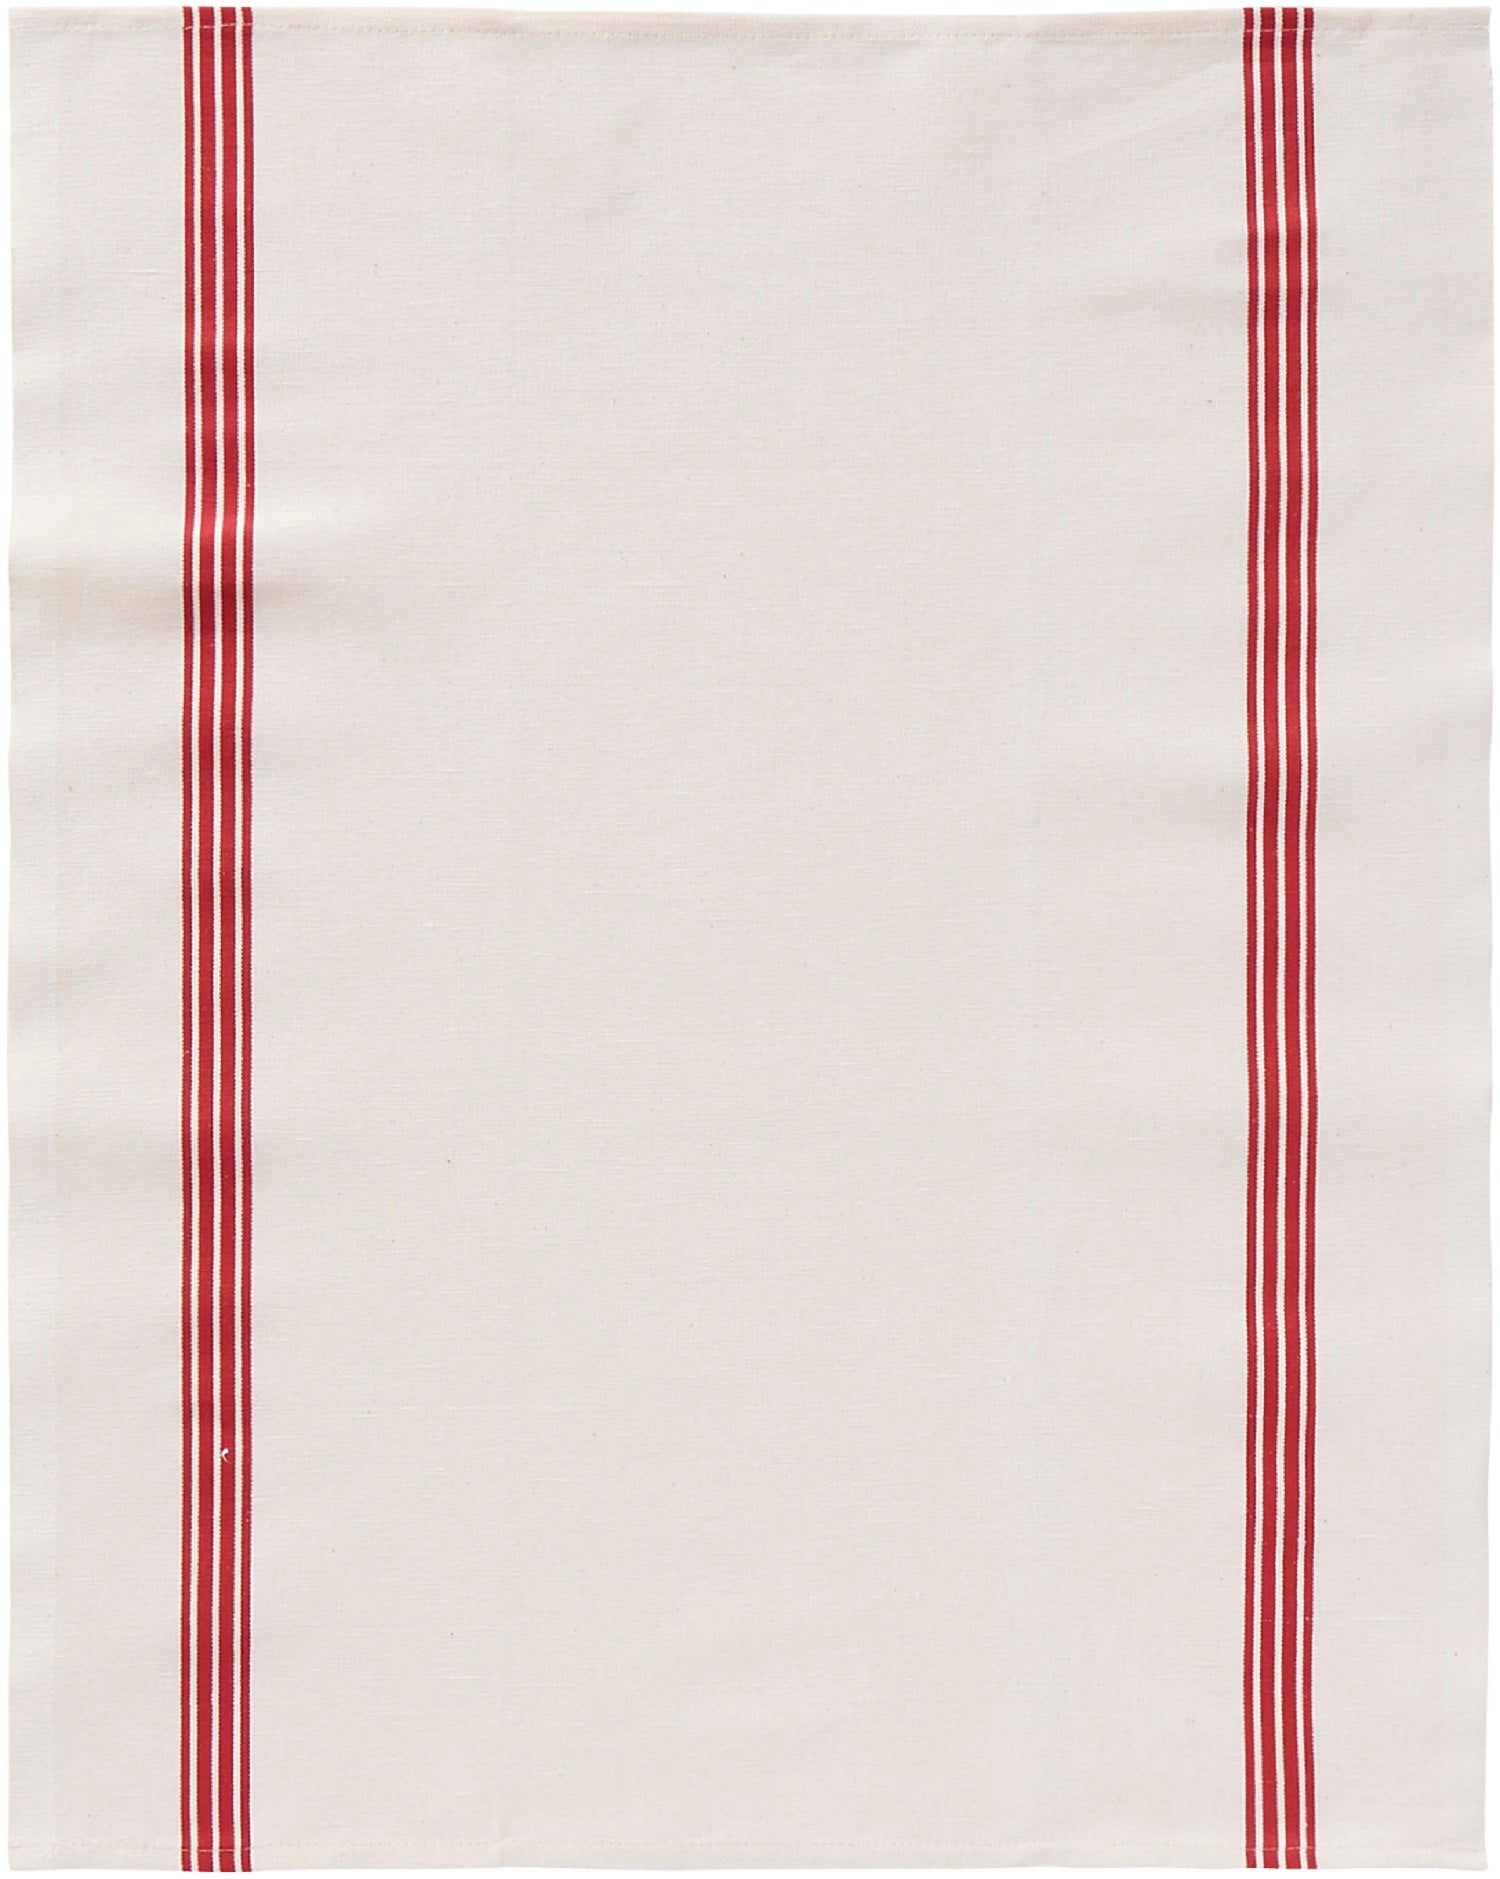 Charvet Editions "Piano" (Red), Woven linen union tea towel. Made in France.